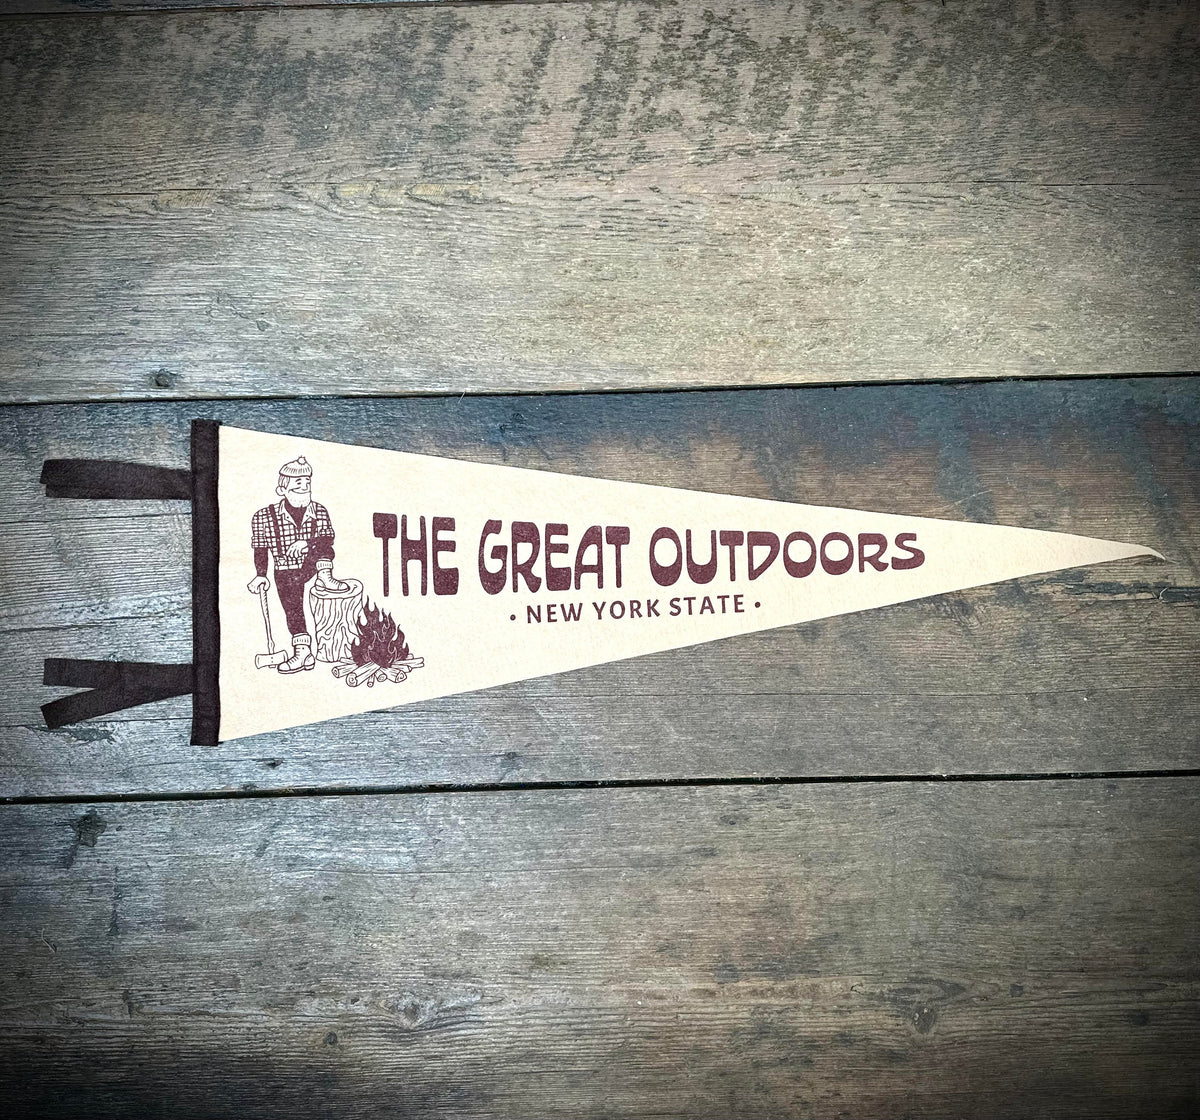 OXFORD PENNANT - The Great Outdoors